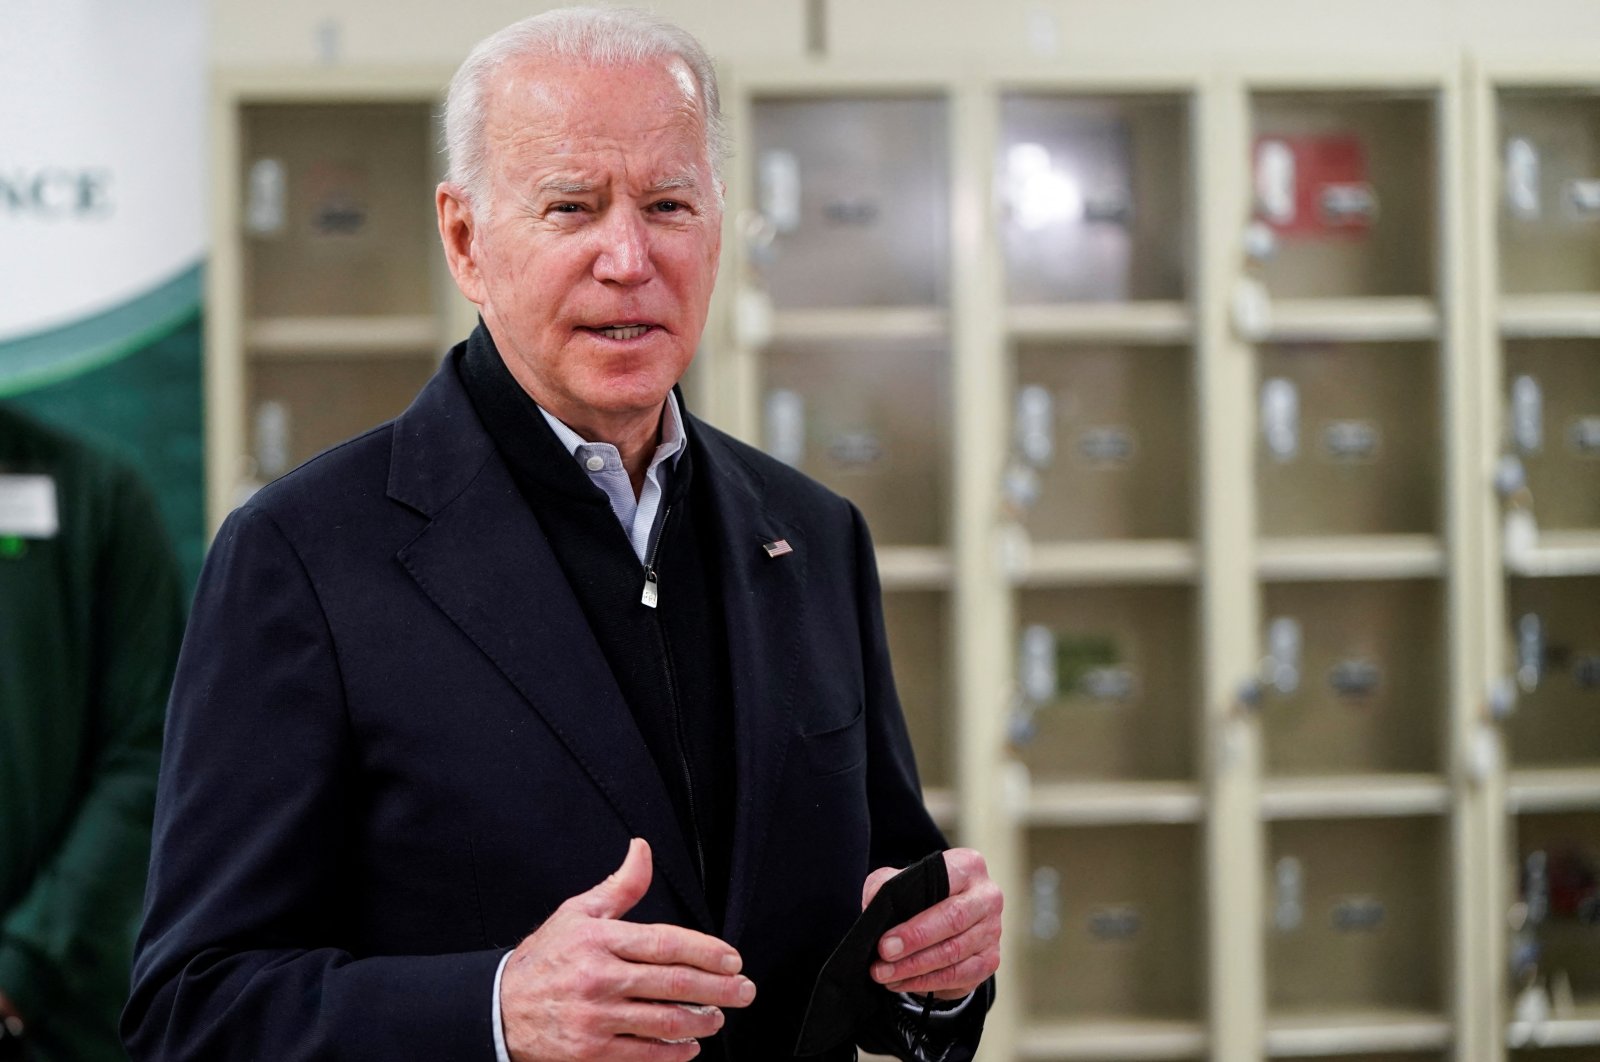 U.S. President Joe Biden speaks about the rescue of hostages taken at a synagogue in Texas before boxing food at Philabundance, a hunger relief organization in Philadelphia, Pennsylvania, U.S., Jan. 16, 2022. (Reuters Photo)